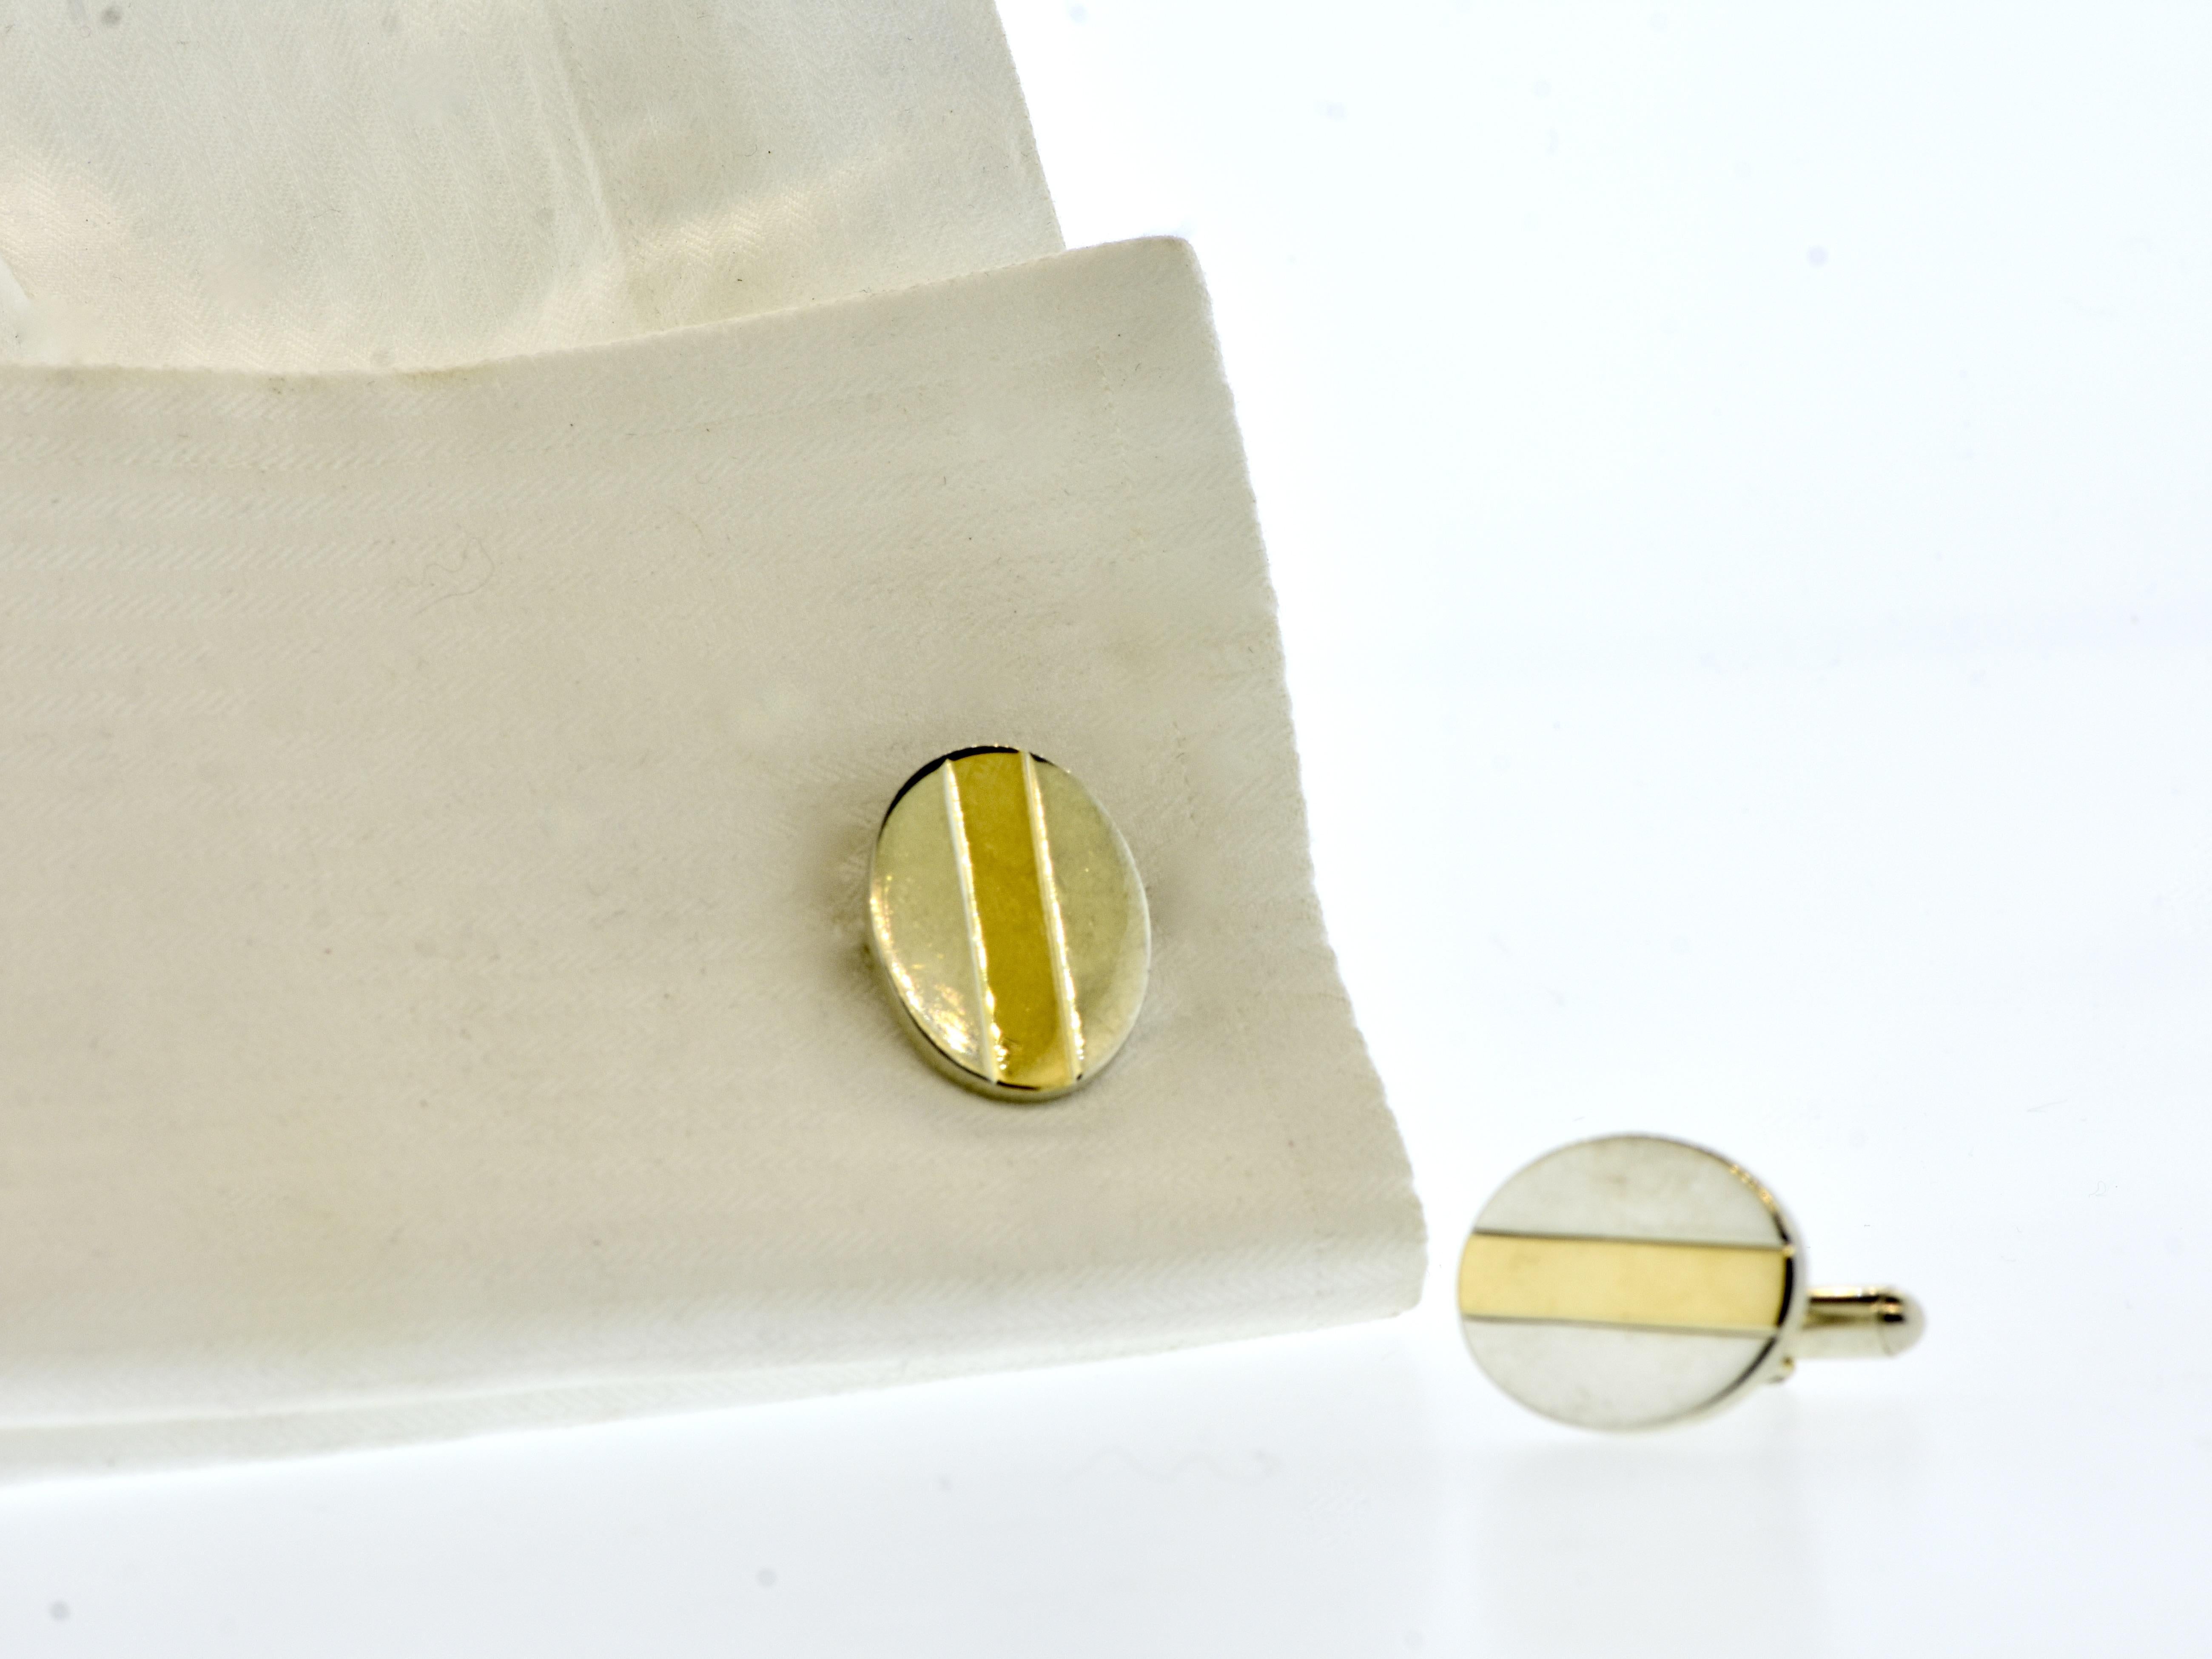 Tiffany & Co yellow gold and sterling silver vintage oval shaped cufflinks, c. 1990.  These cufflinks weigh 15.3 grams, they have a length of 13/16th of an inch, and a width of 10/16th of an inch.

In fine condition, these classic cufflinks are easy